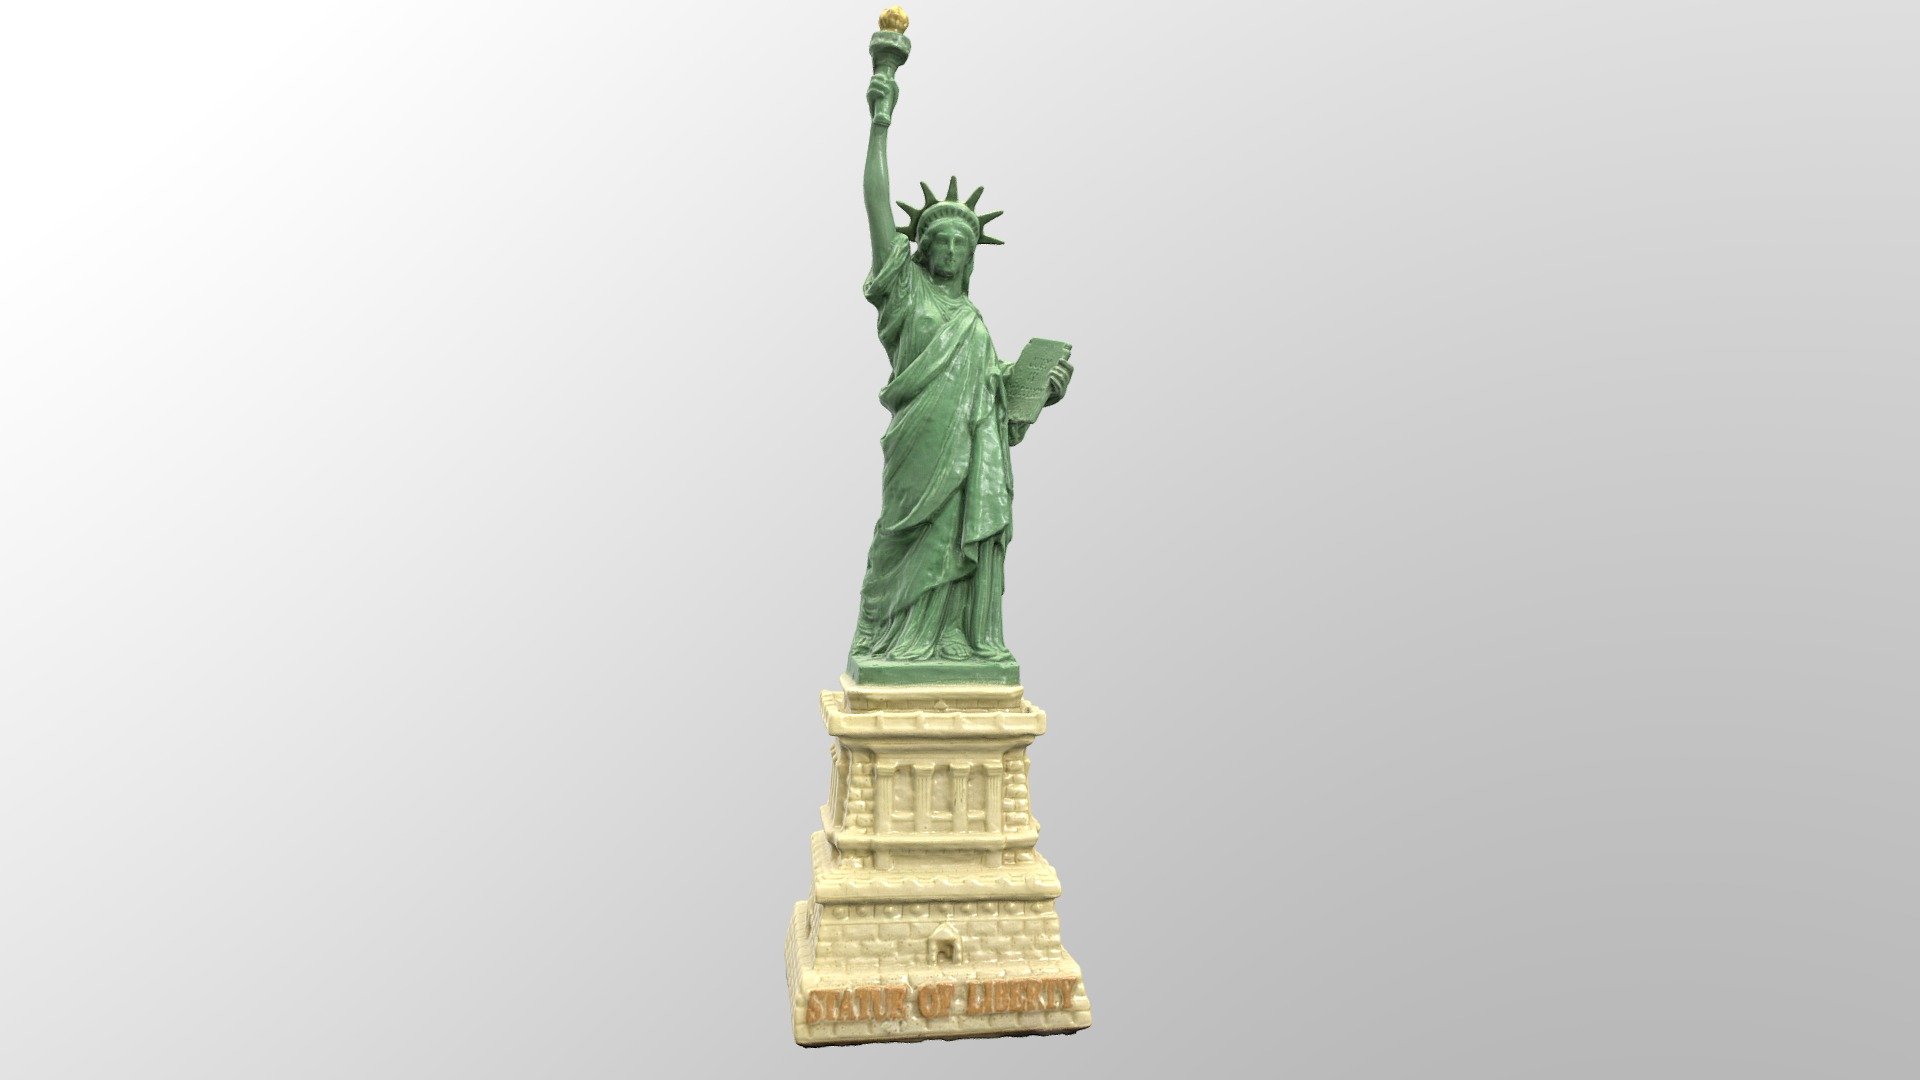 Photoscan of a small Statue of Liberty souvenir from New York City.
about 3